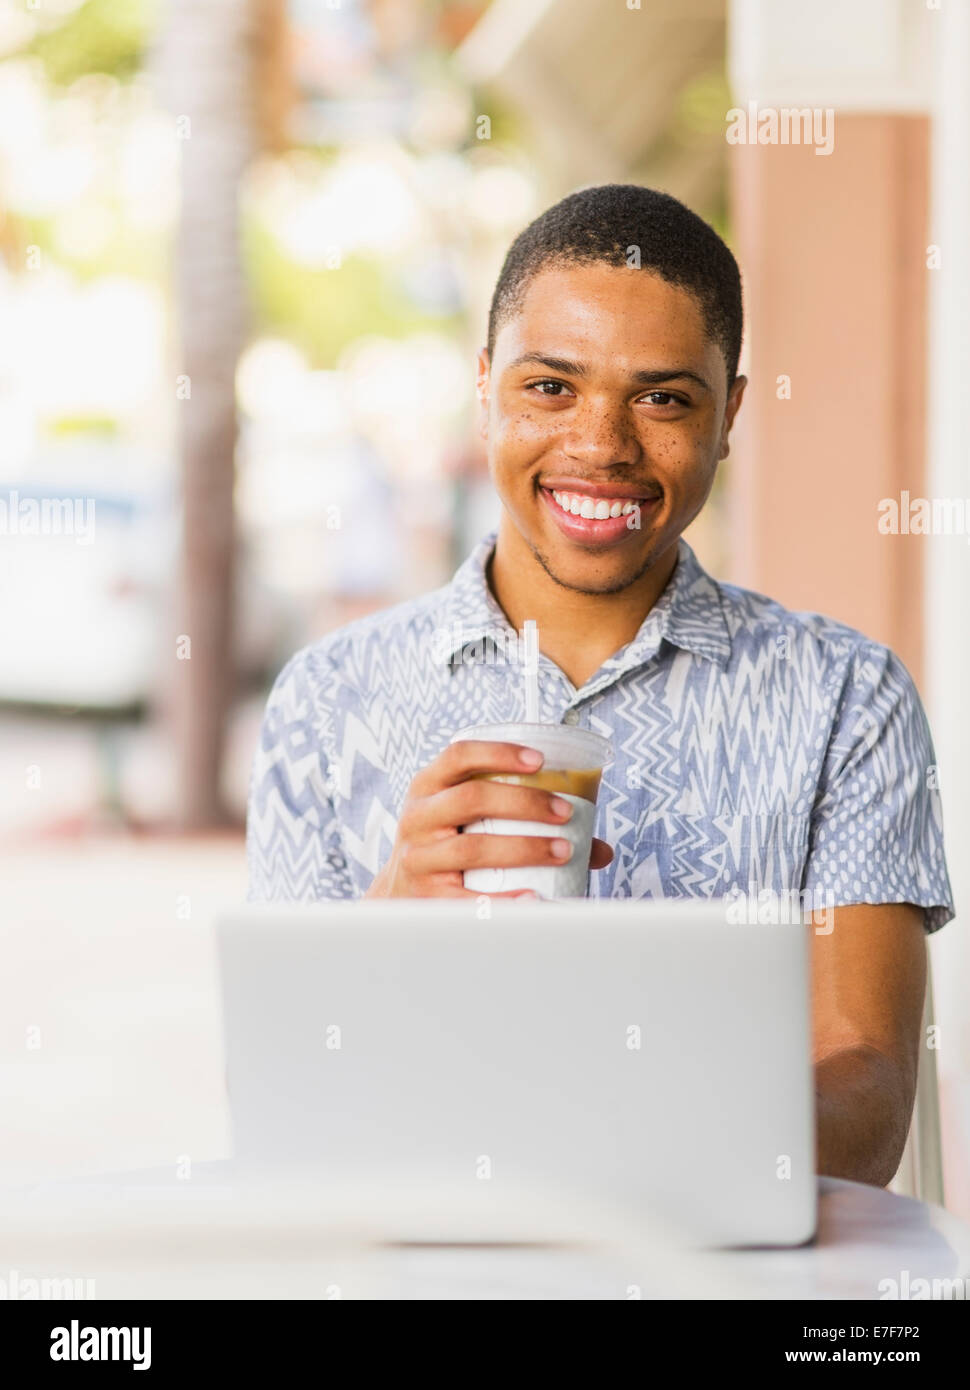 African American man using laptop in cafe Stock Photo